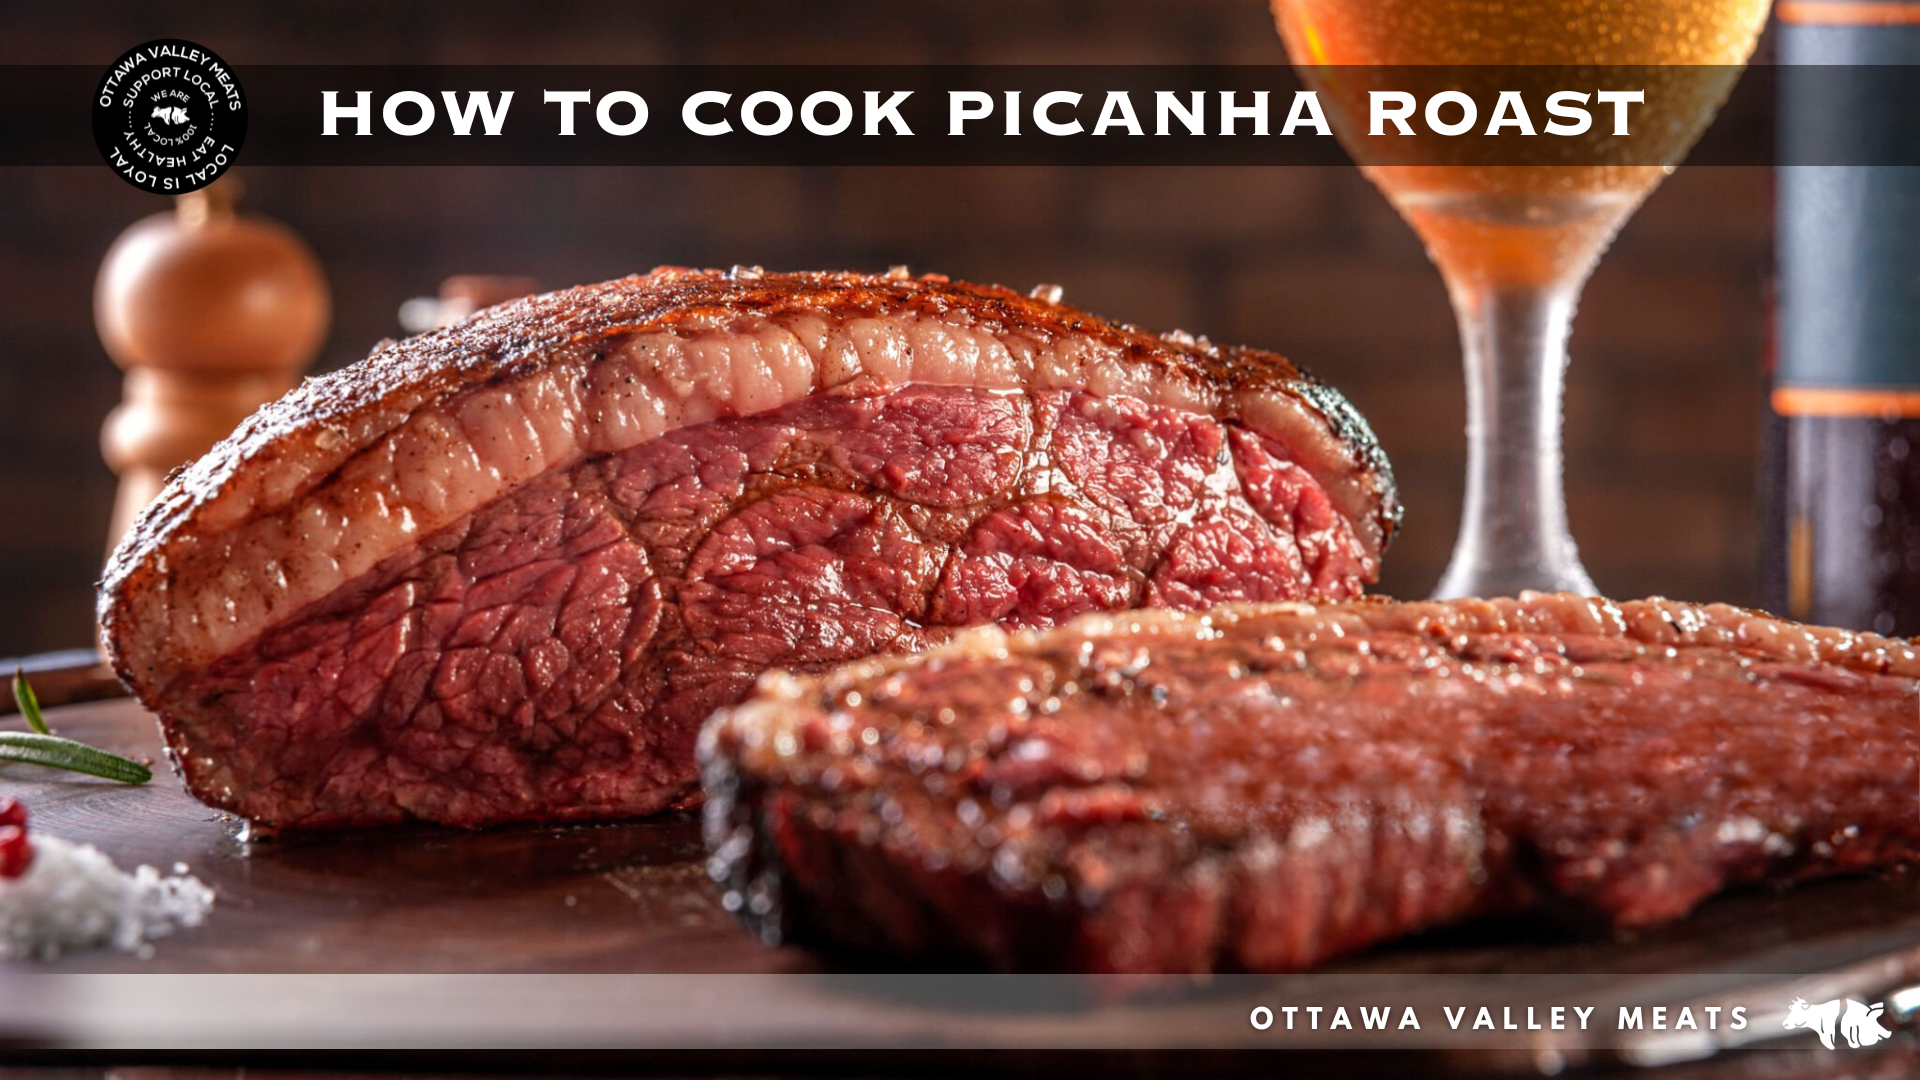 How To Cook Picanha Roast